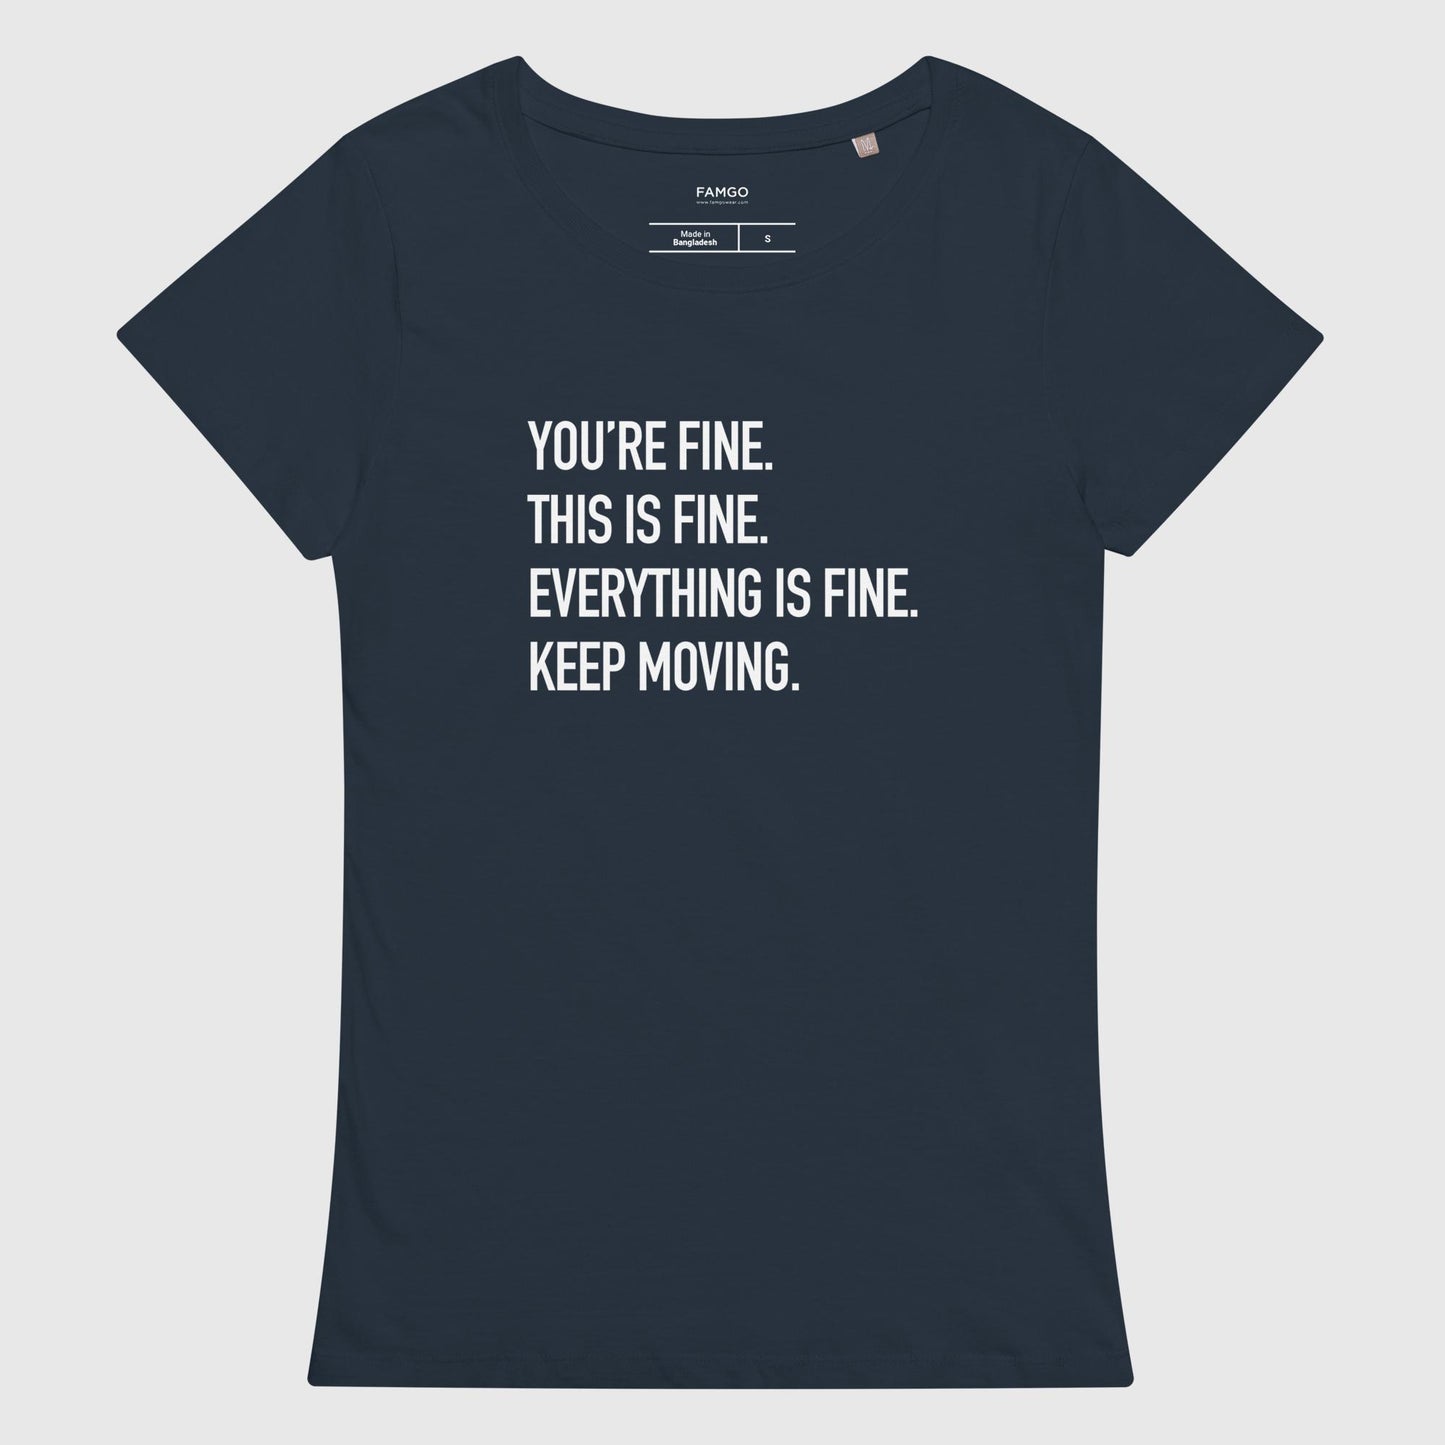 Women's french navy organic cotton t-shirt that features Courtney Dauwalter's mantra, "You're fine. This is fine. Everything is fine. Keep moving."